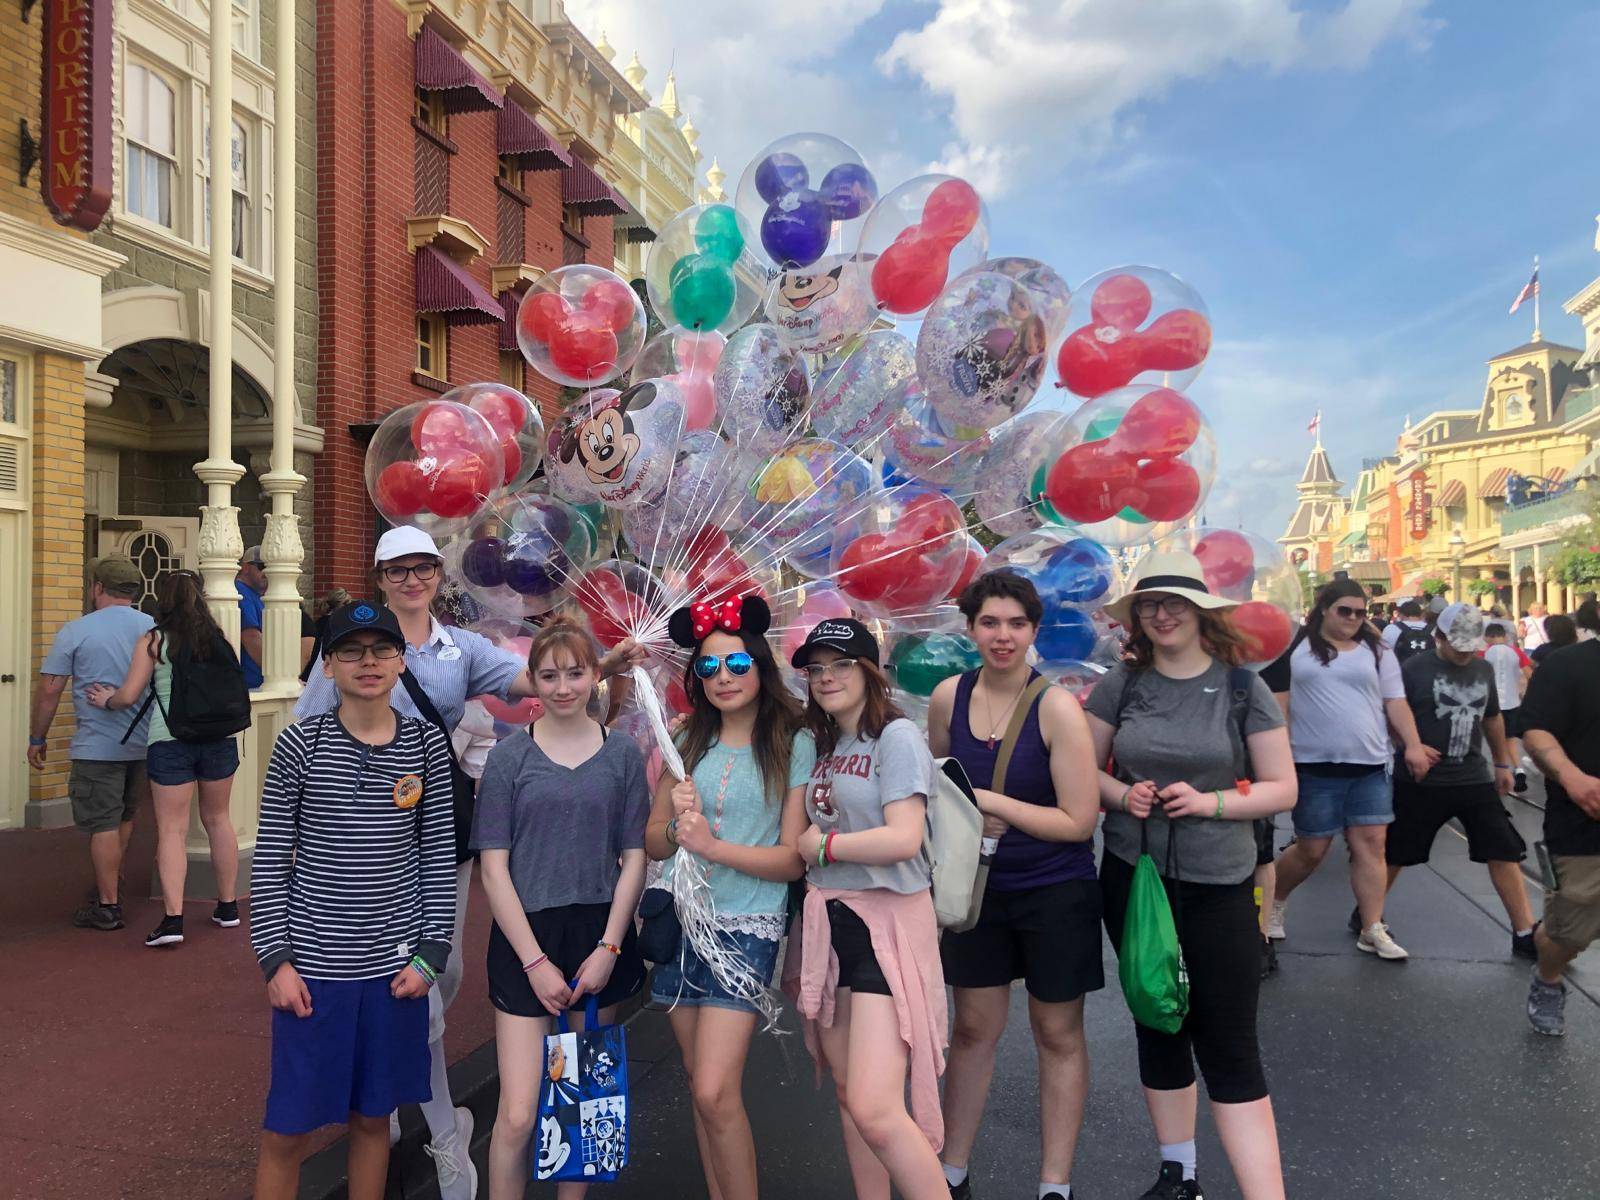 Students with the Walt Disney World balloons in Magic Kingdom.